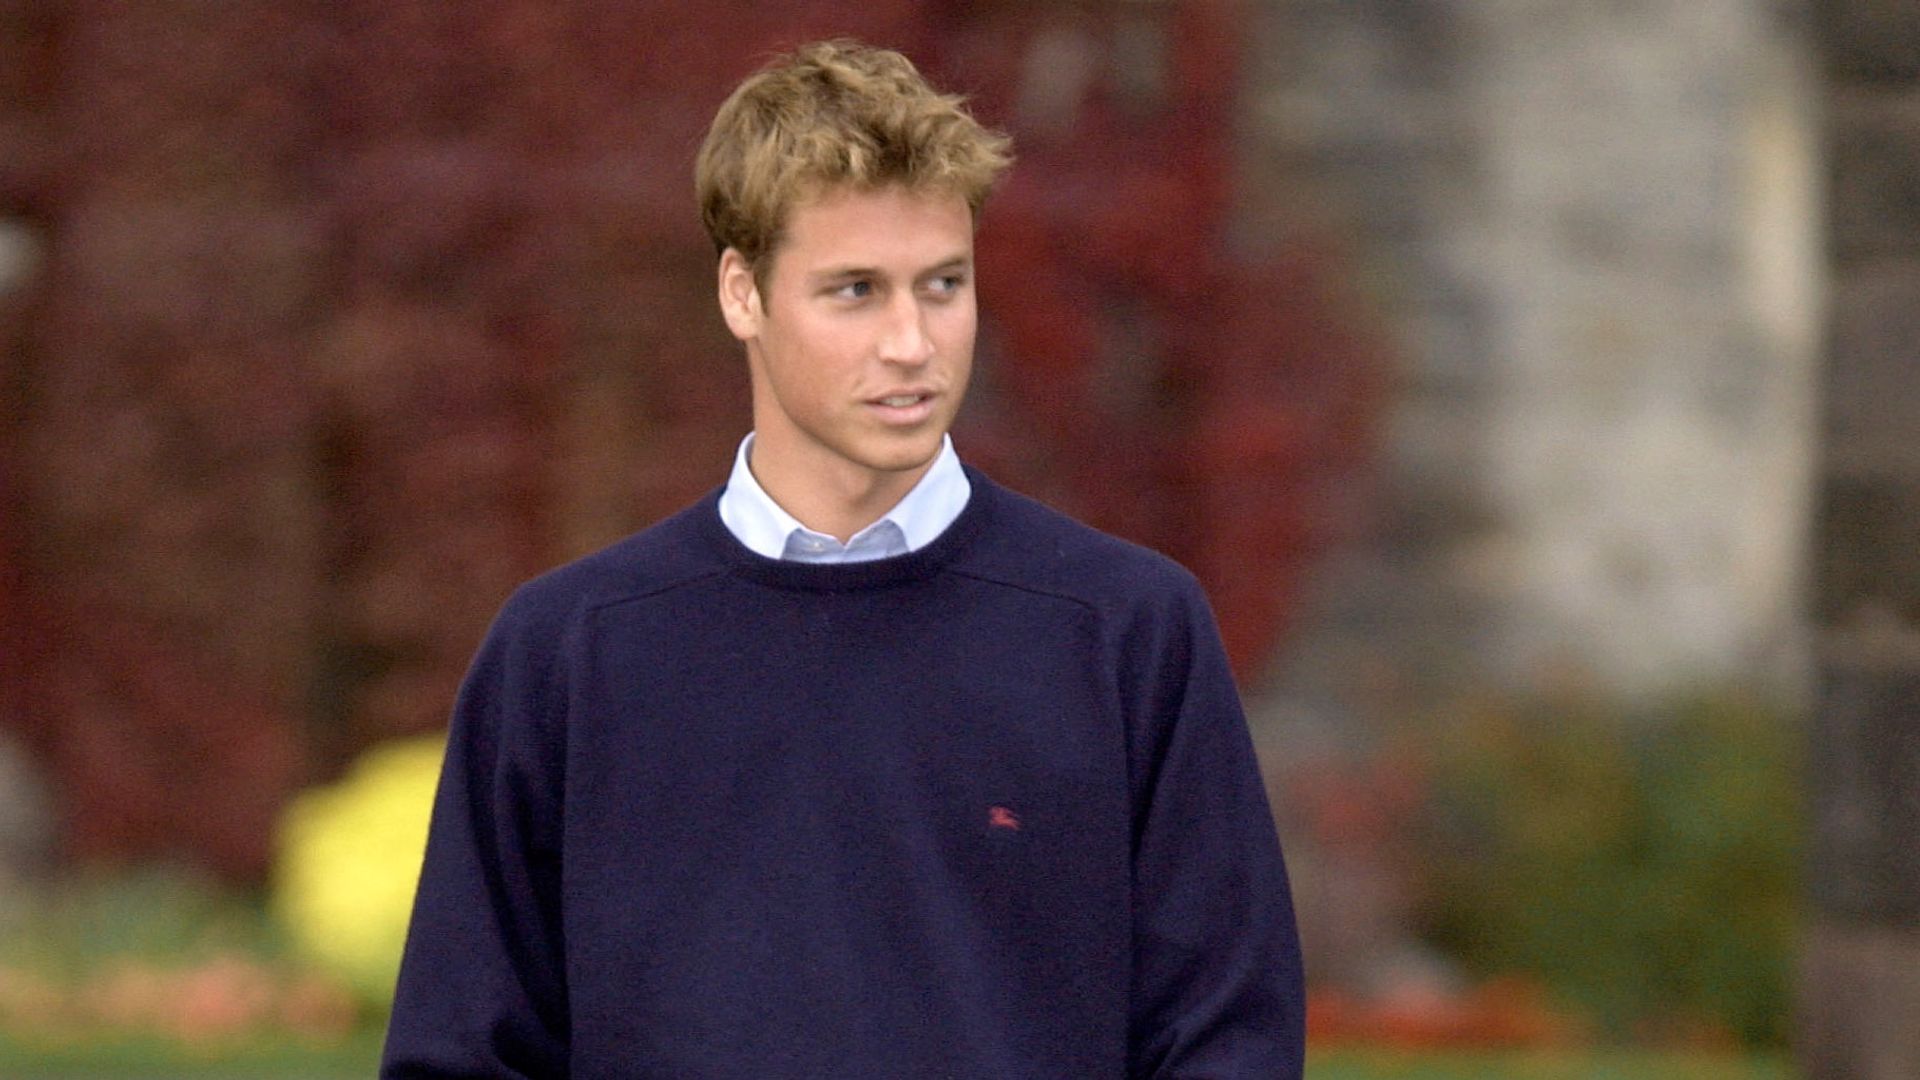 Fresh-faced royals on their first day at university